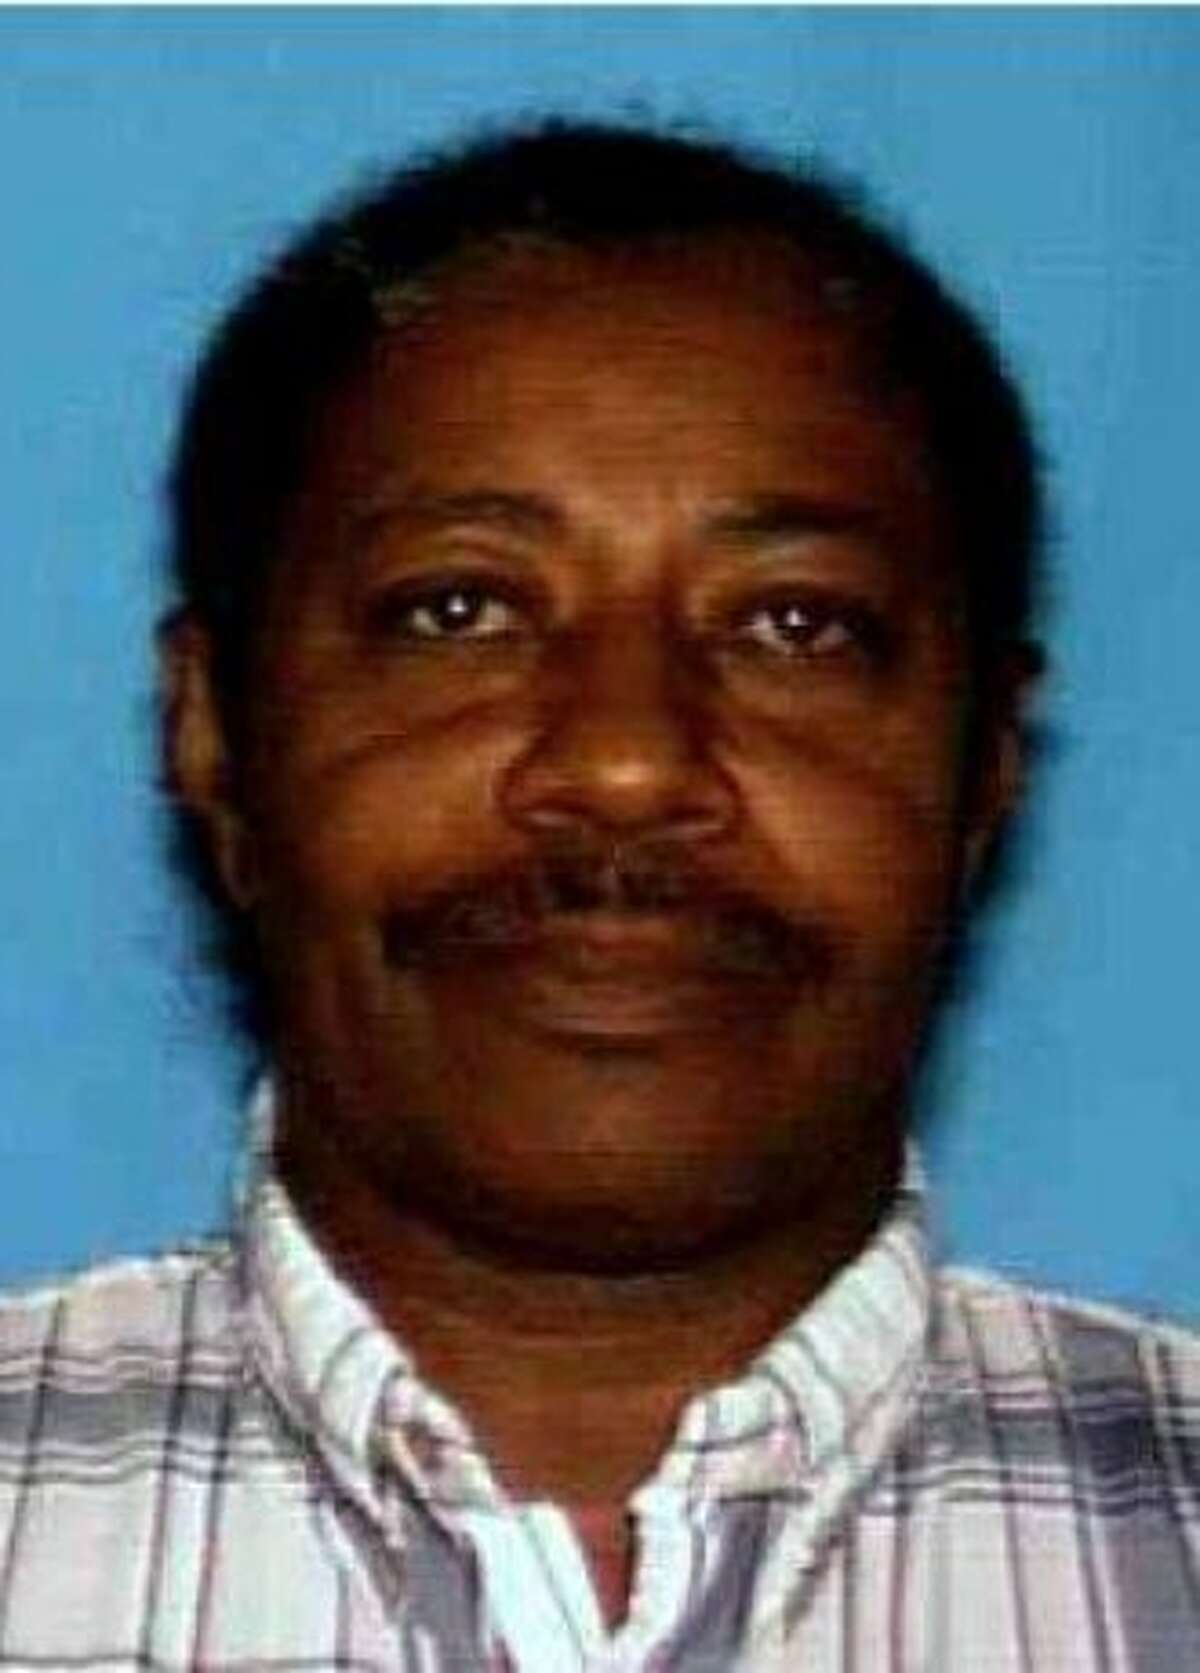 Jerry Johnson, 56, a special education teacher at Loma Vista Elementary School in Vallejo. He was arrested June 13, 2011, on suspicion of raping an 18-year-old student aide who has the mental capacity of a 7-year-old.